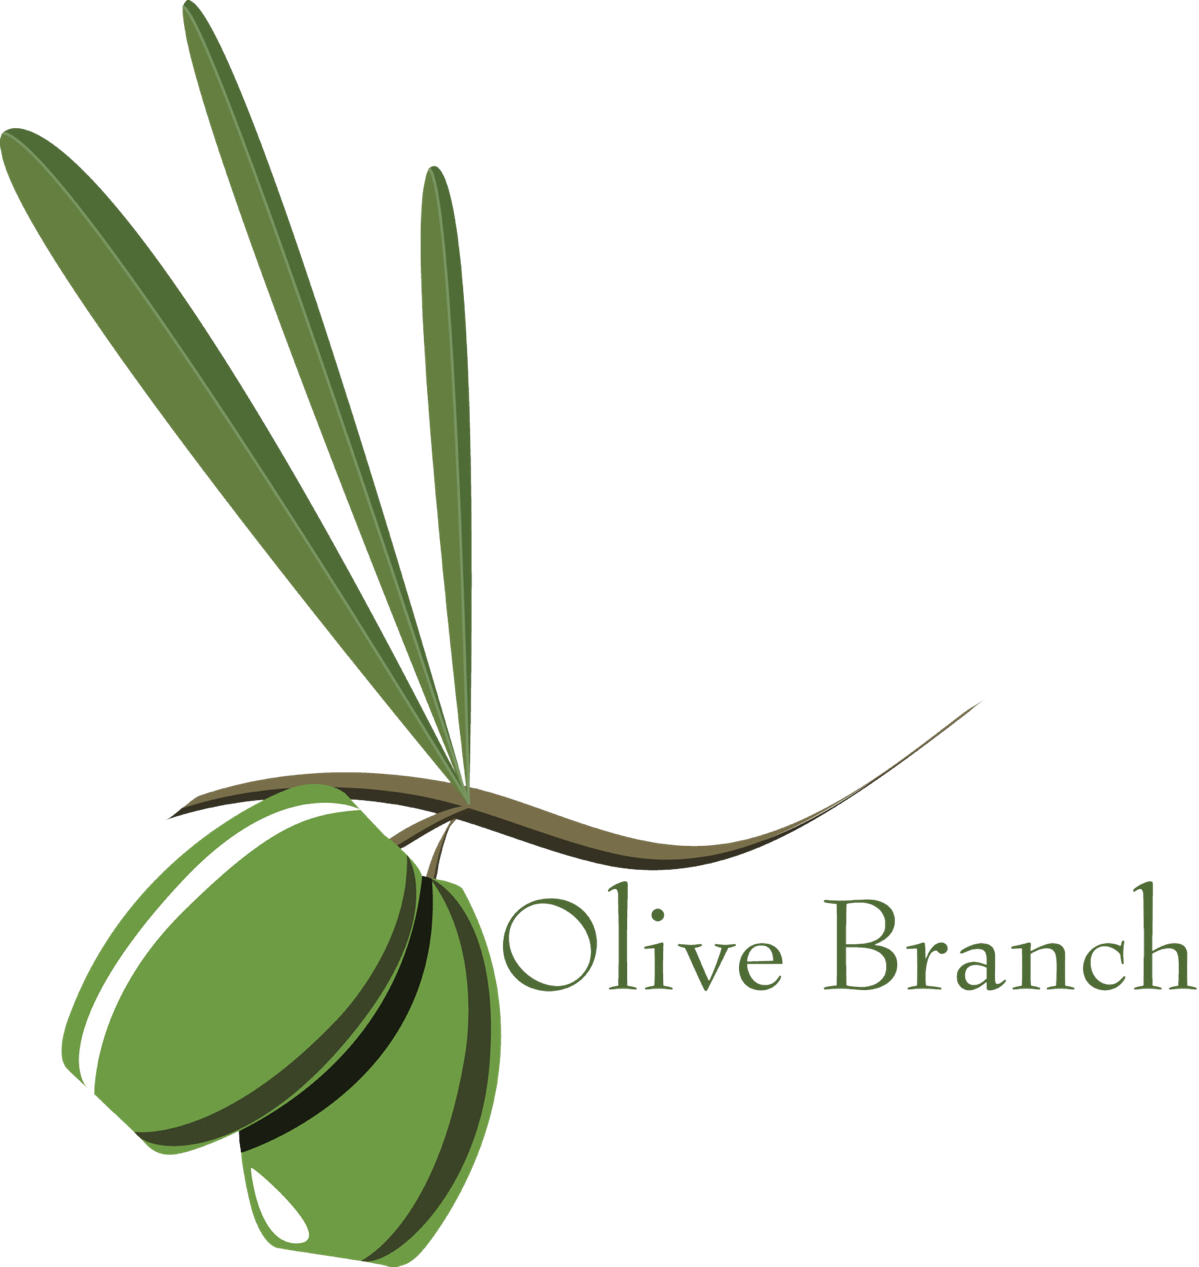 Olive Branch Petition Photos Free Image - Olive Branch Petition Drawing (1199x1267)